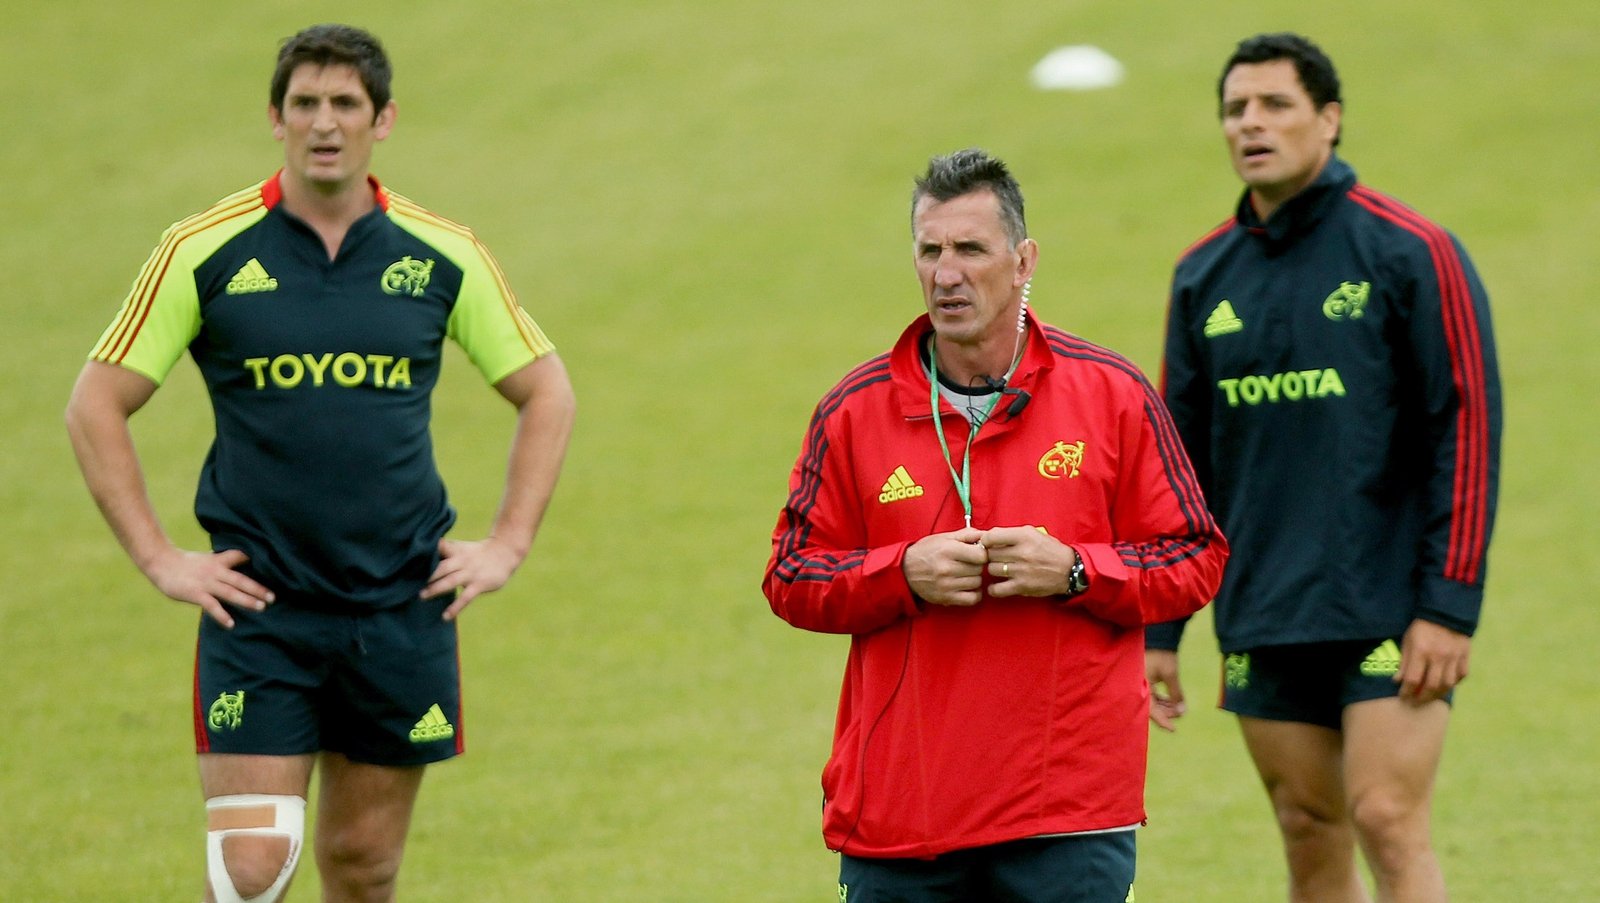 Image - Downey believes Munster may have tried too much, too soon under head coach Rob Penney